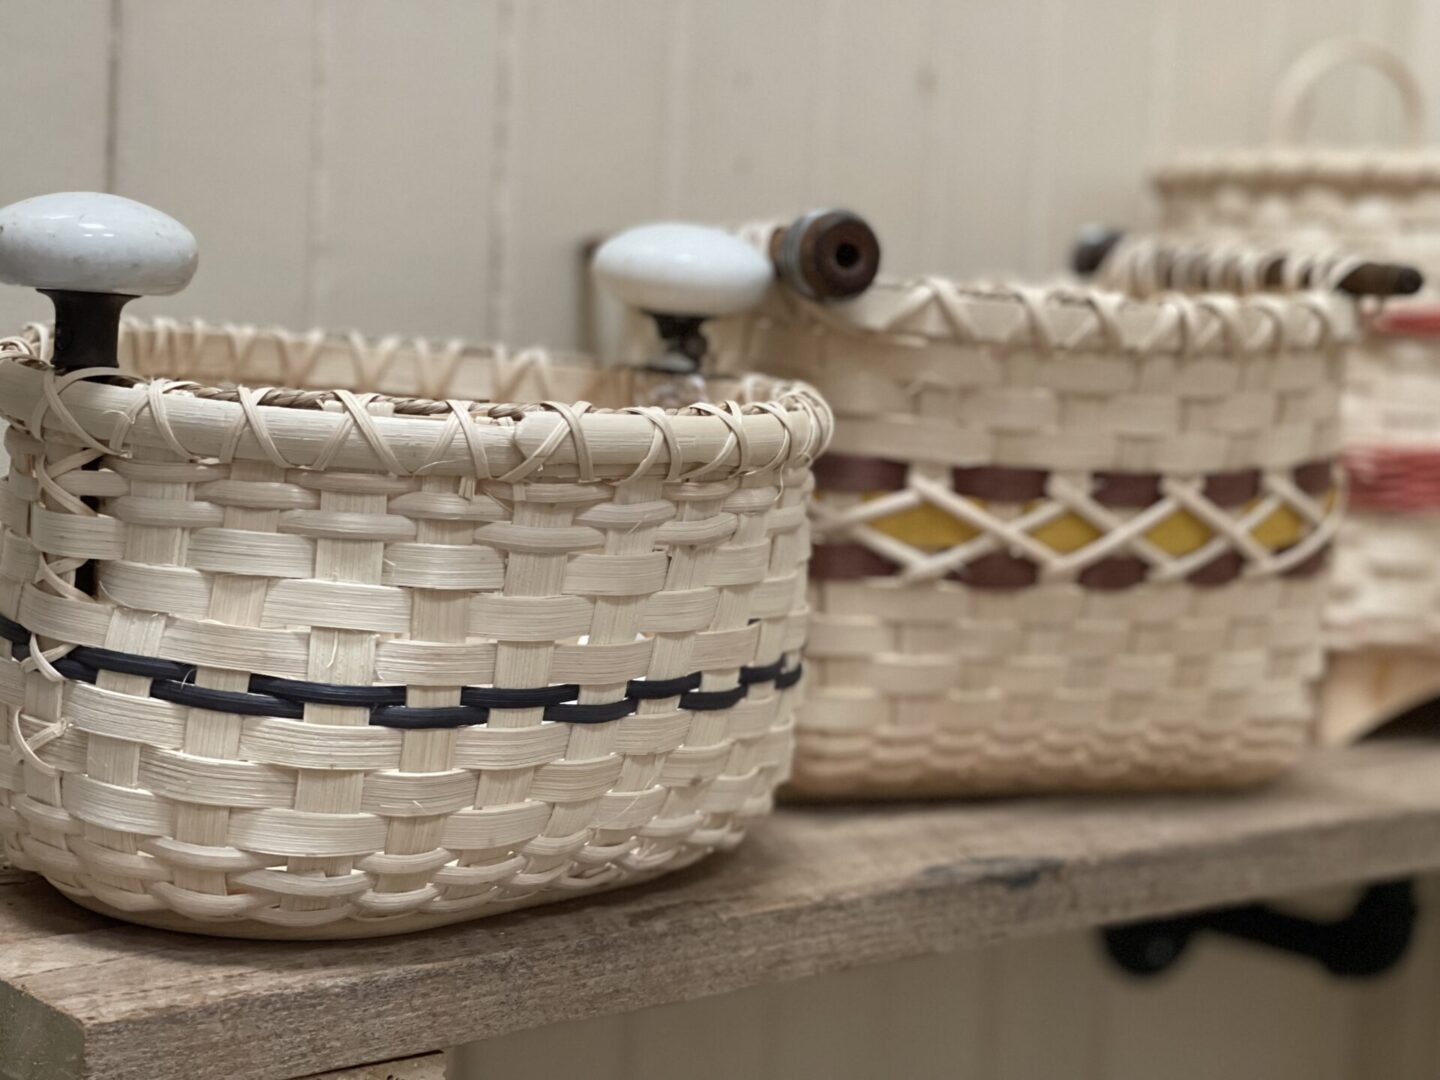 Three baskets are sitting on a shelf next to each other.